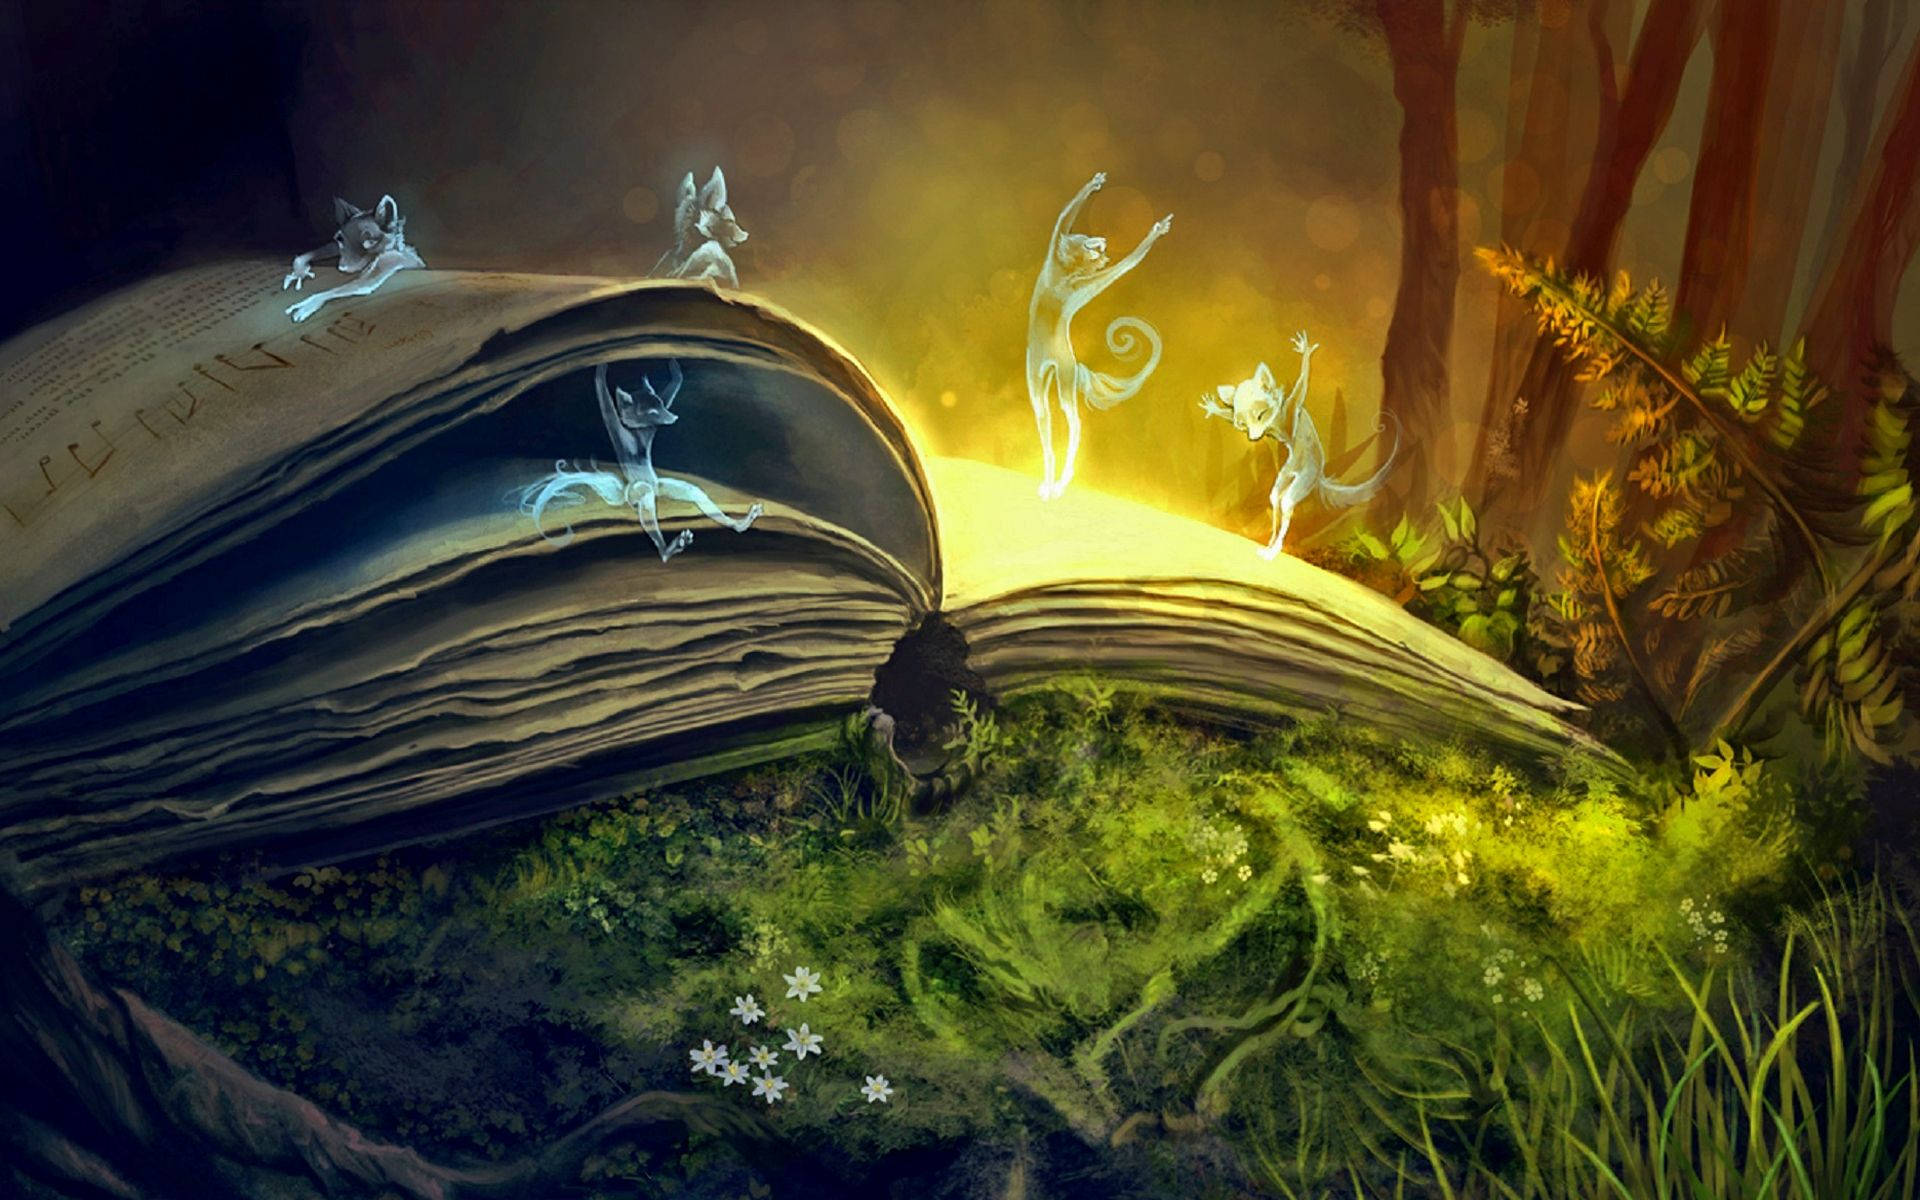 Open magical fantasy book with creatures on the pages wallpaper